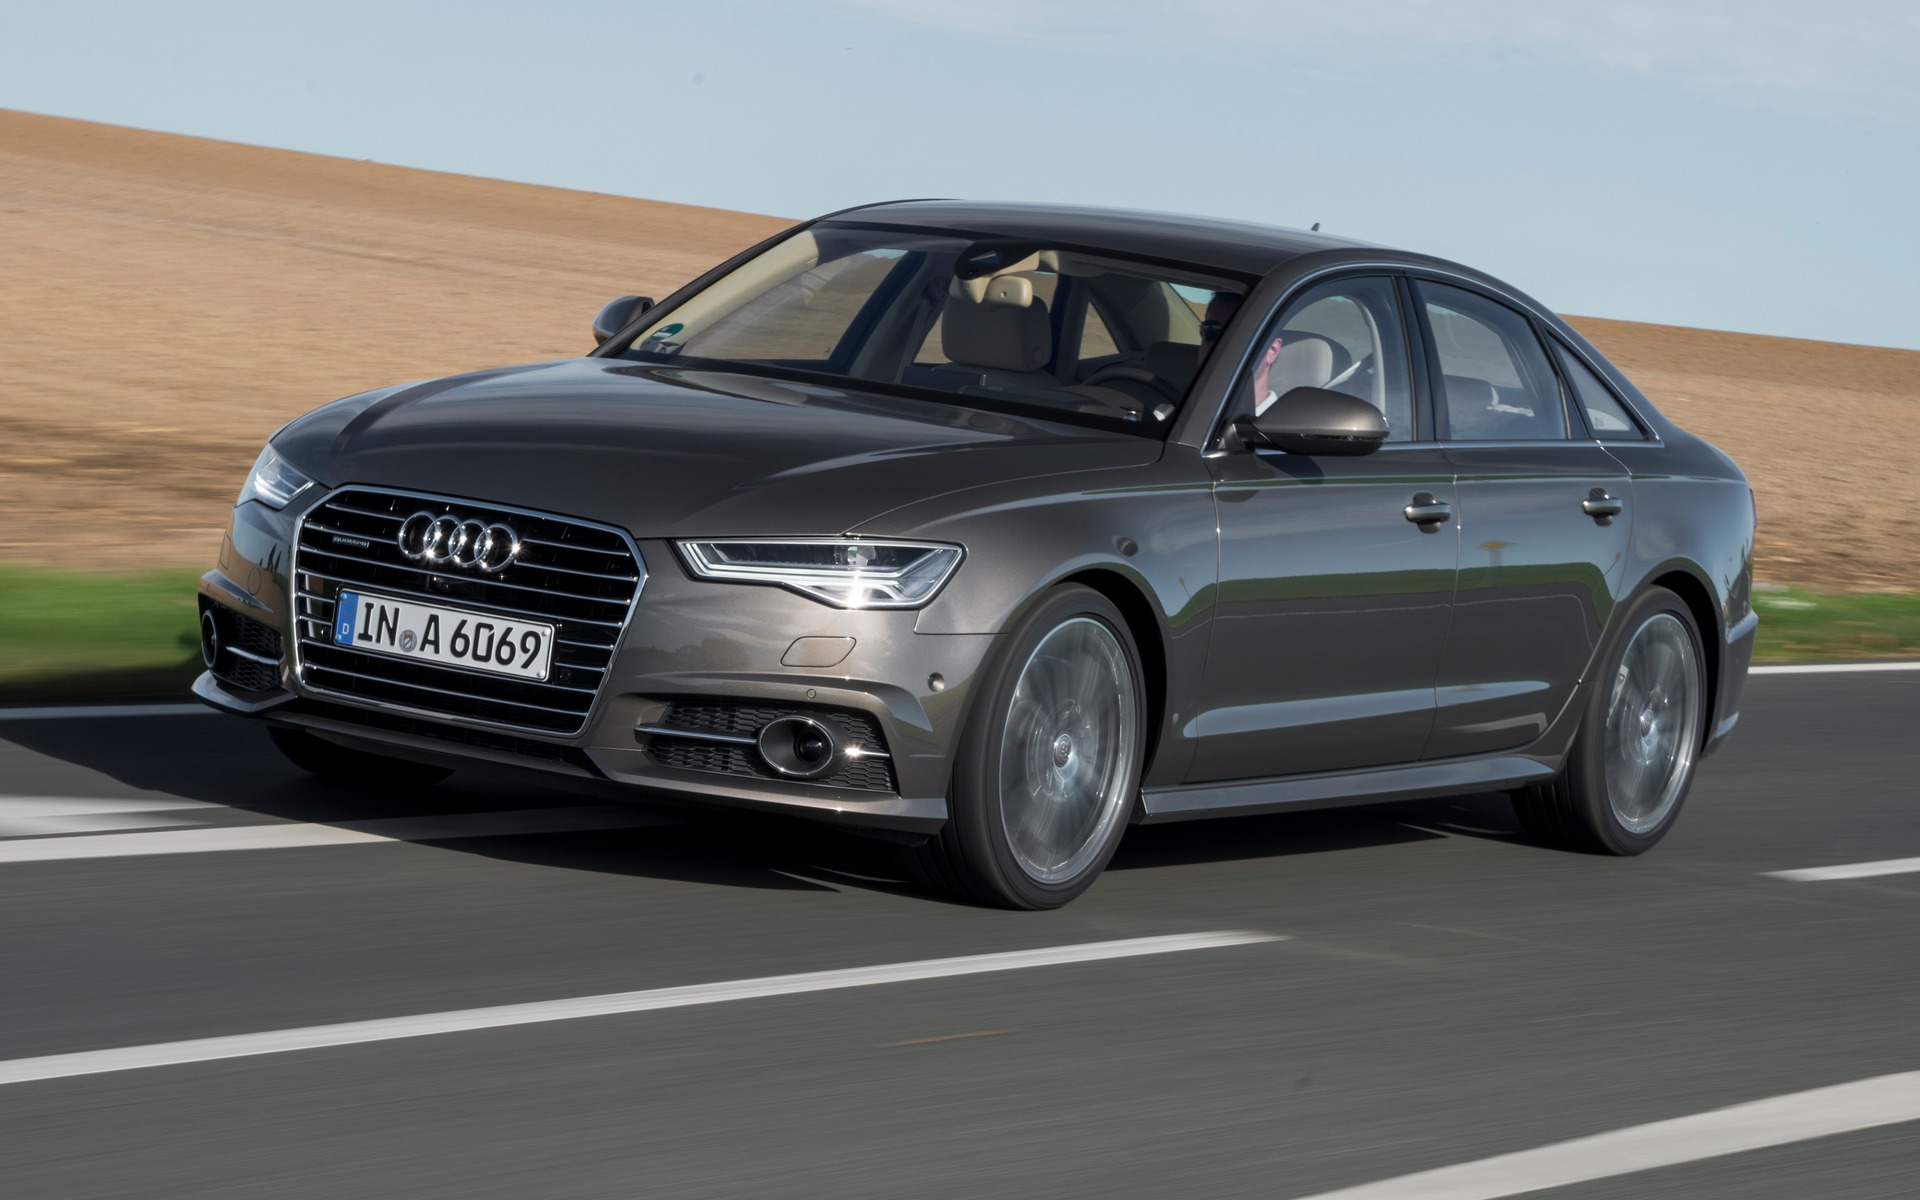 The 2.0-litre turbo four-cylinder's power is up to 252 horsepower for 2016.